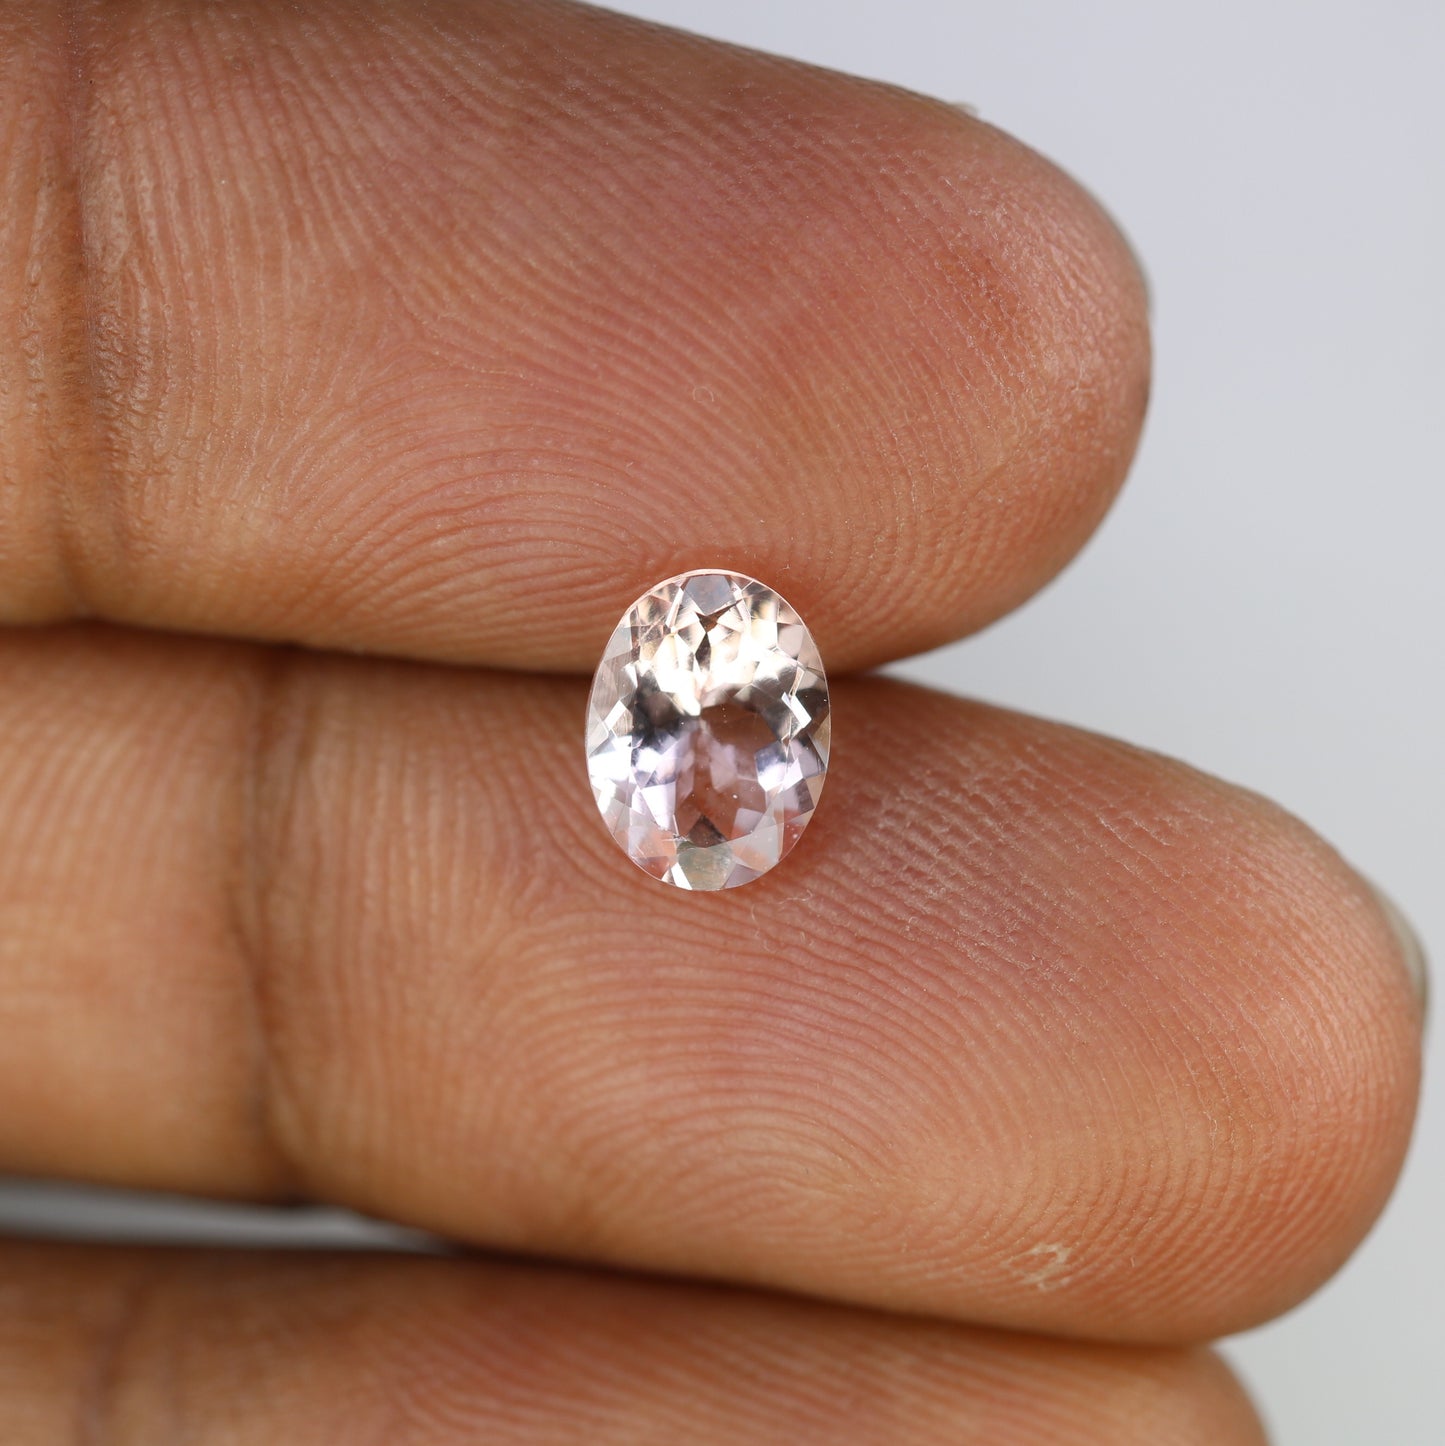 1.18 CT 8.10 x 6.20 MM Morganite Oval Stone For Engagement Ring